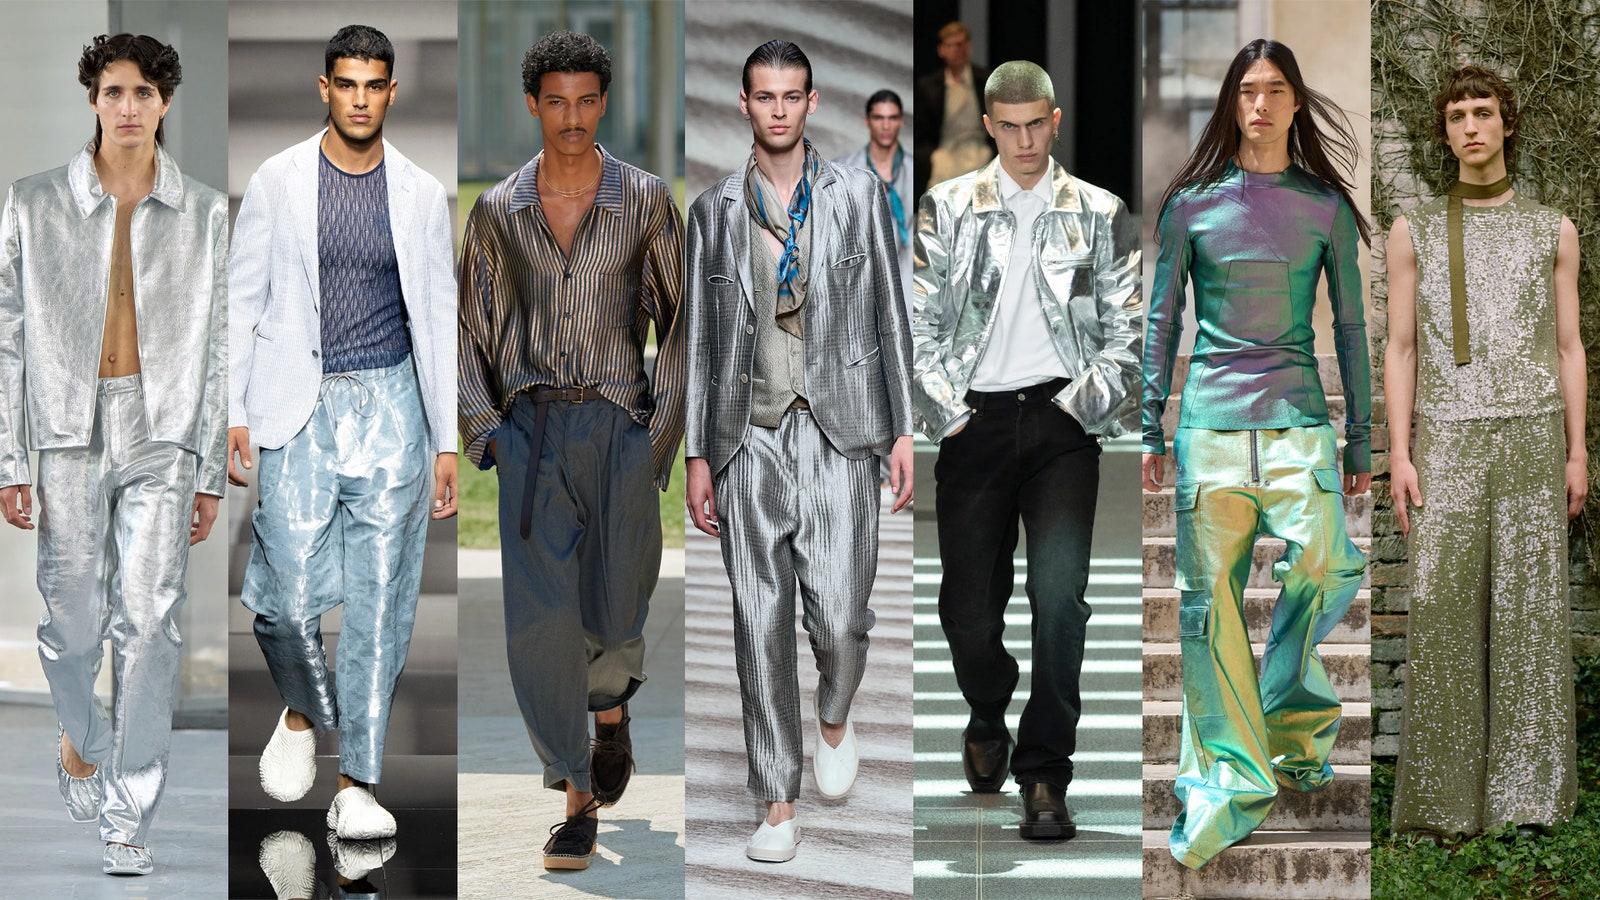 Top Suit Styles: The Best Men's Fashion Trends for 2023